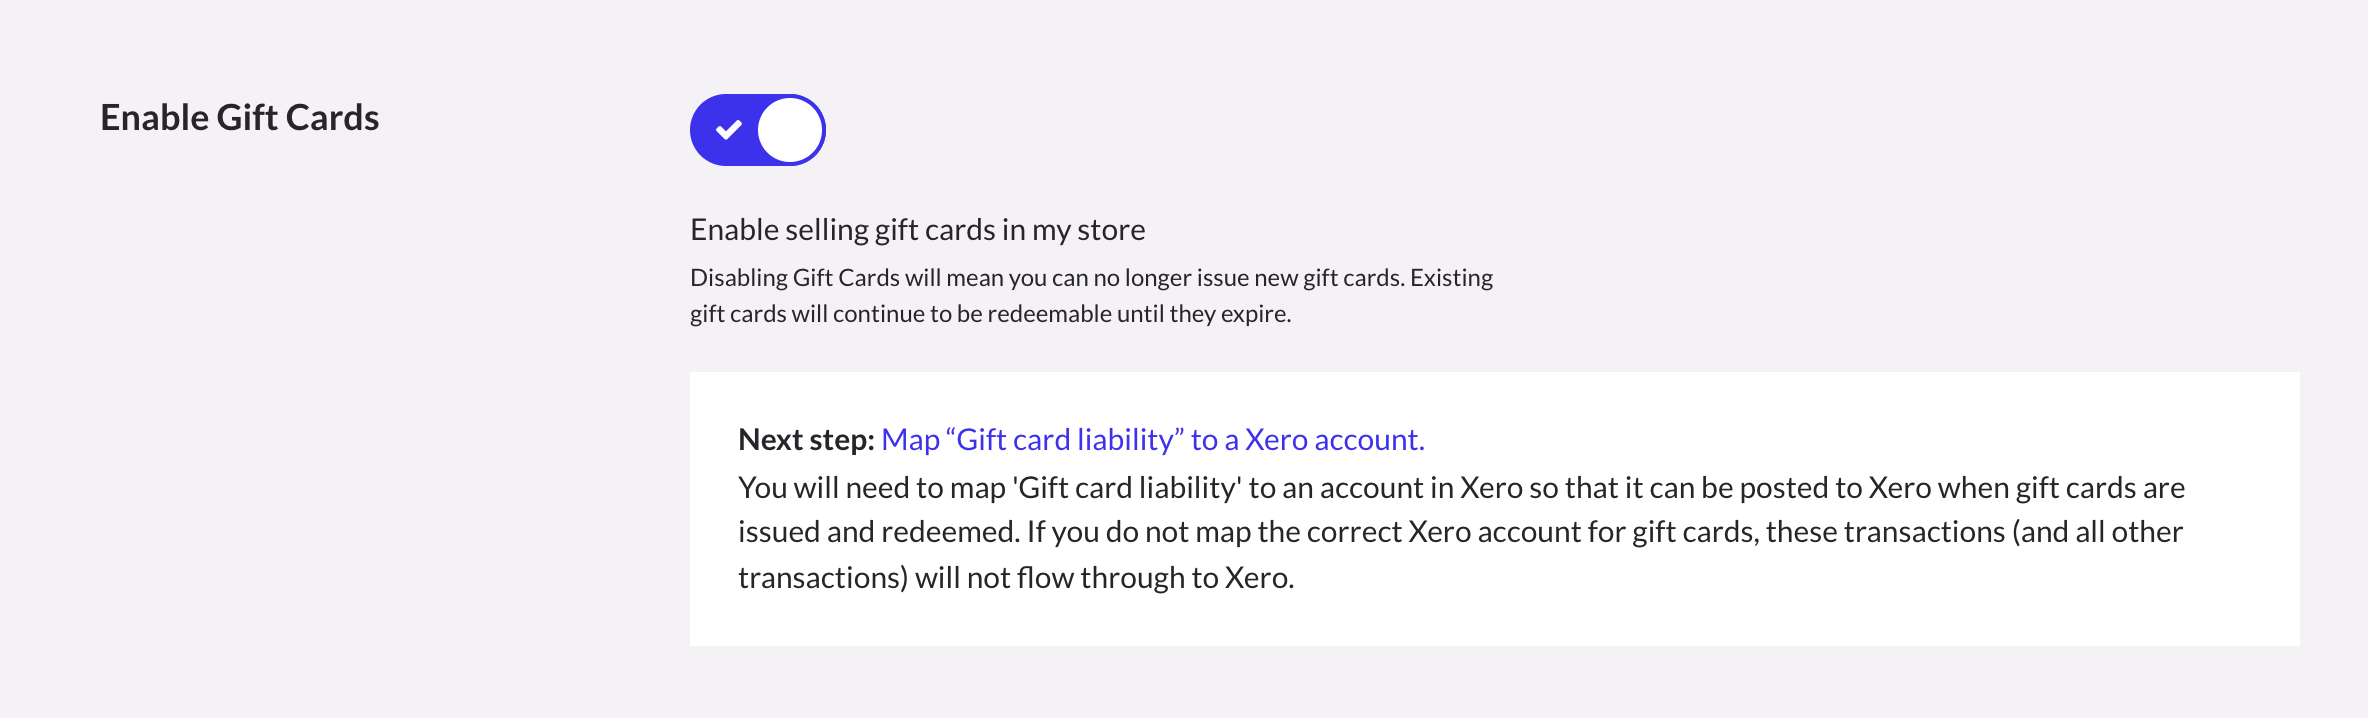 Enable-Gift-Cards.png